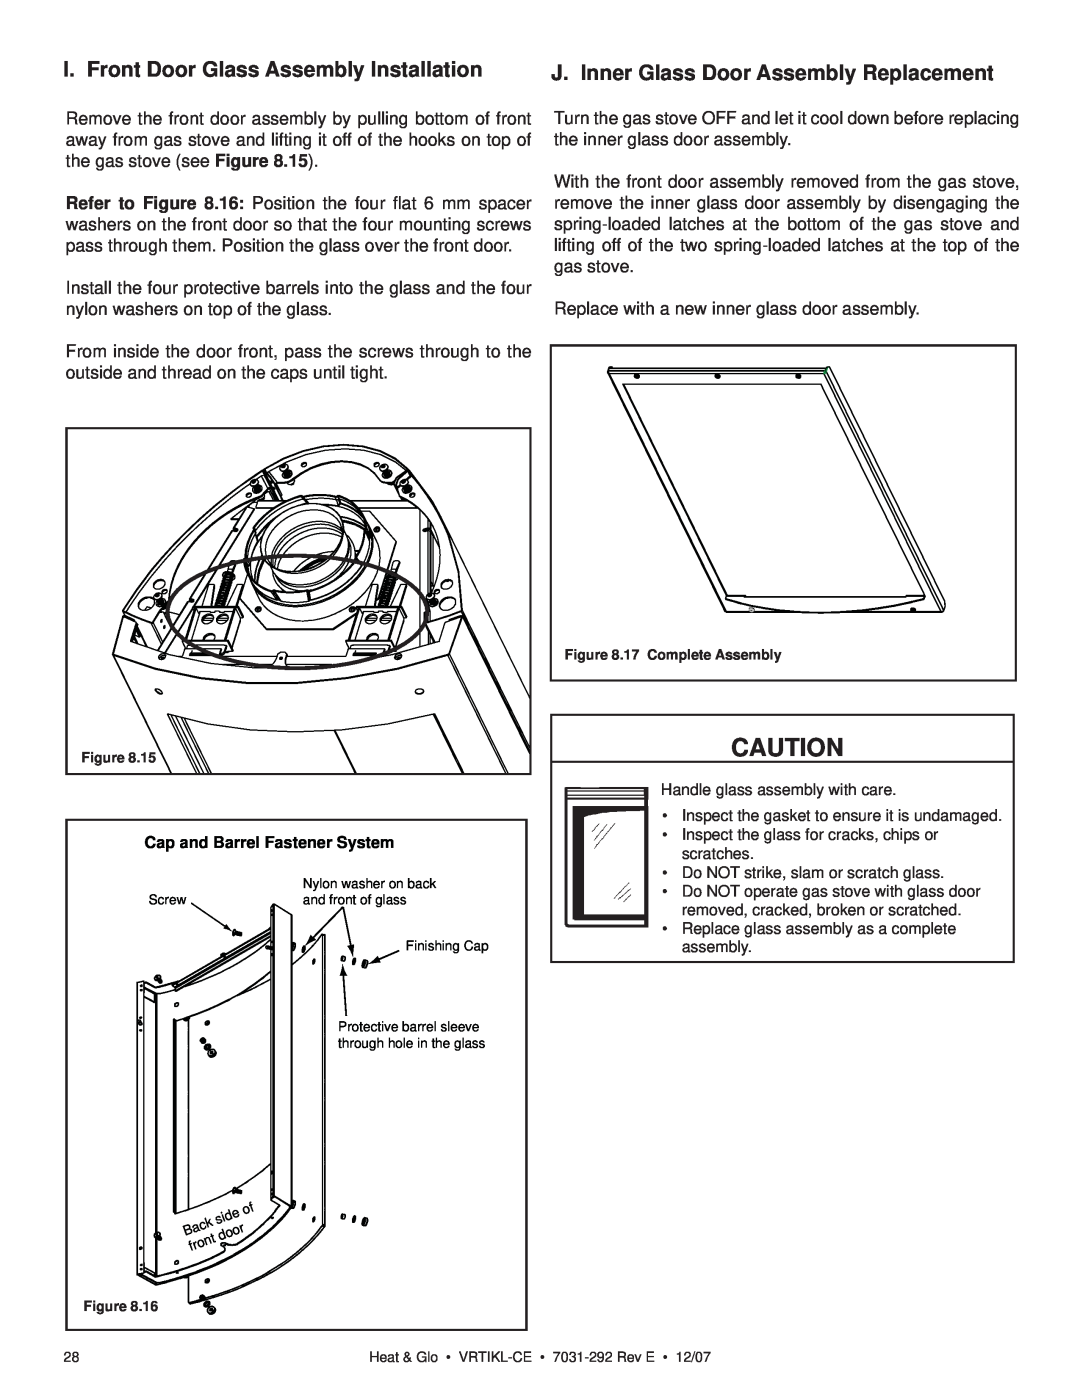 Hearth and Home Technologies VRT-GR-B-CE, VRTIKL-CE, VRT-GY-P-CE, VRT-GY-N-CE manual I. Front Door Glass Assembly Installation 